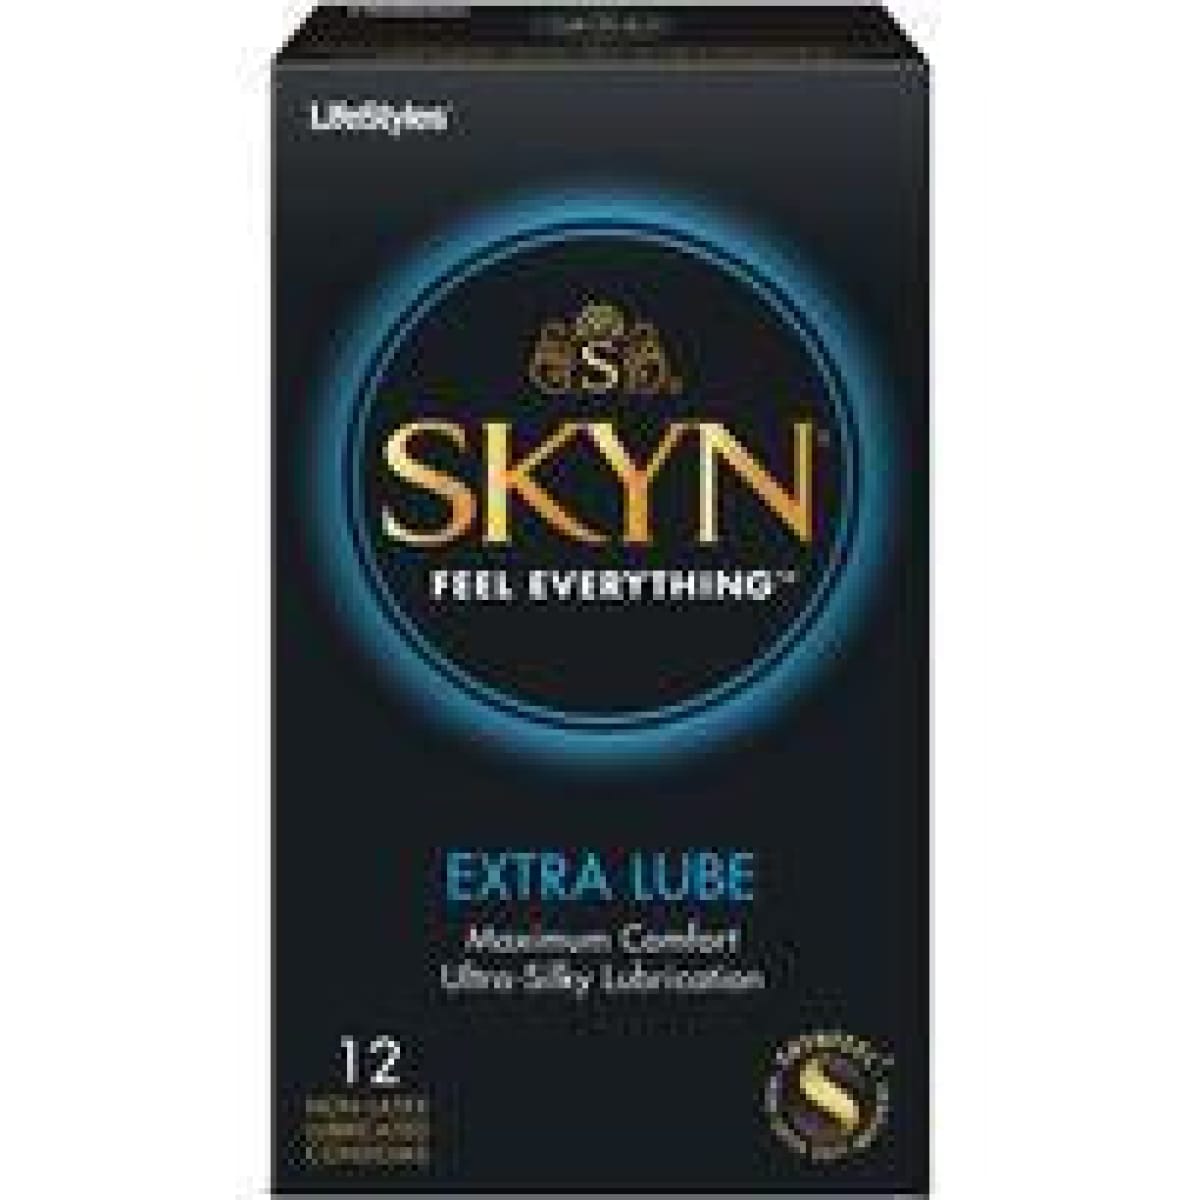 Lifestyles Skyn Extra Lubricated 12pk Intimates Adult Boutique